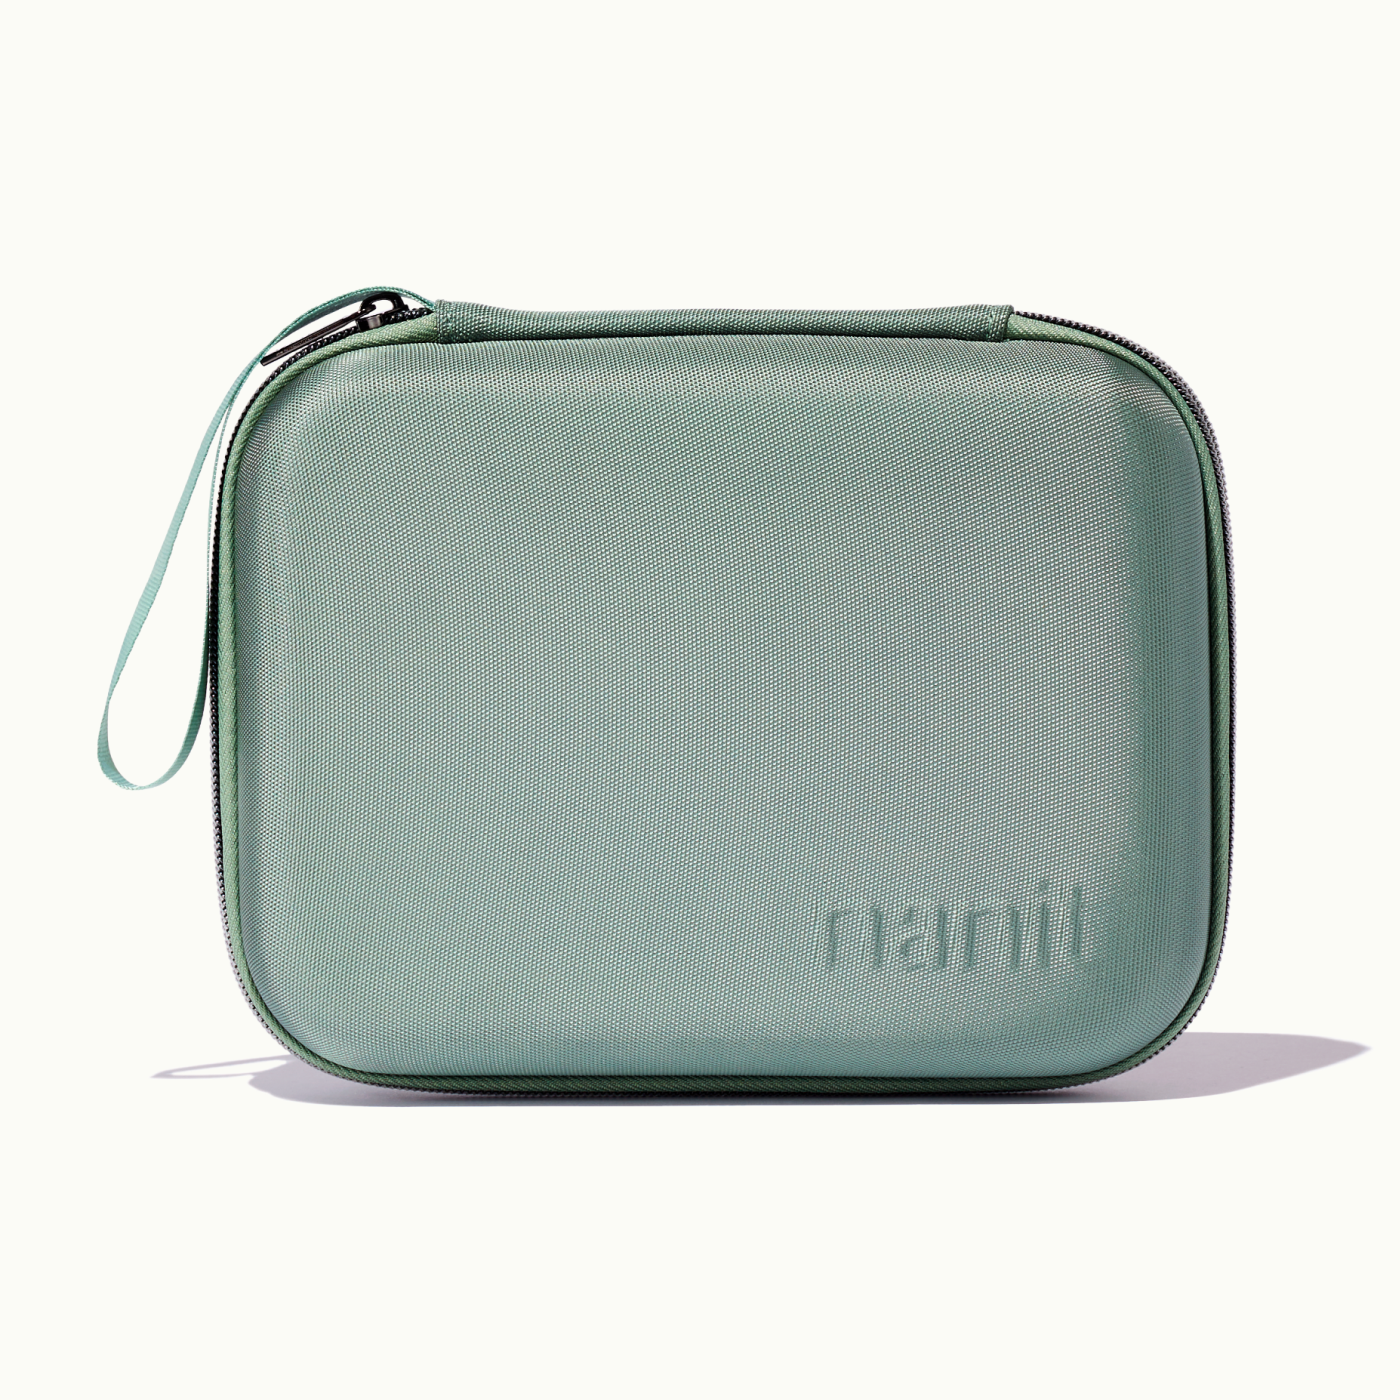 Nanit Clearance Travel Case